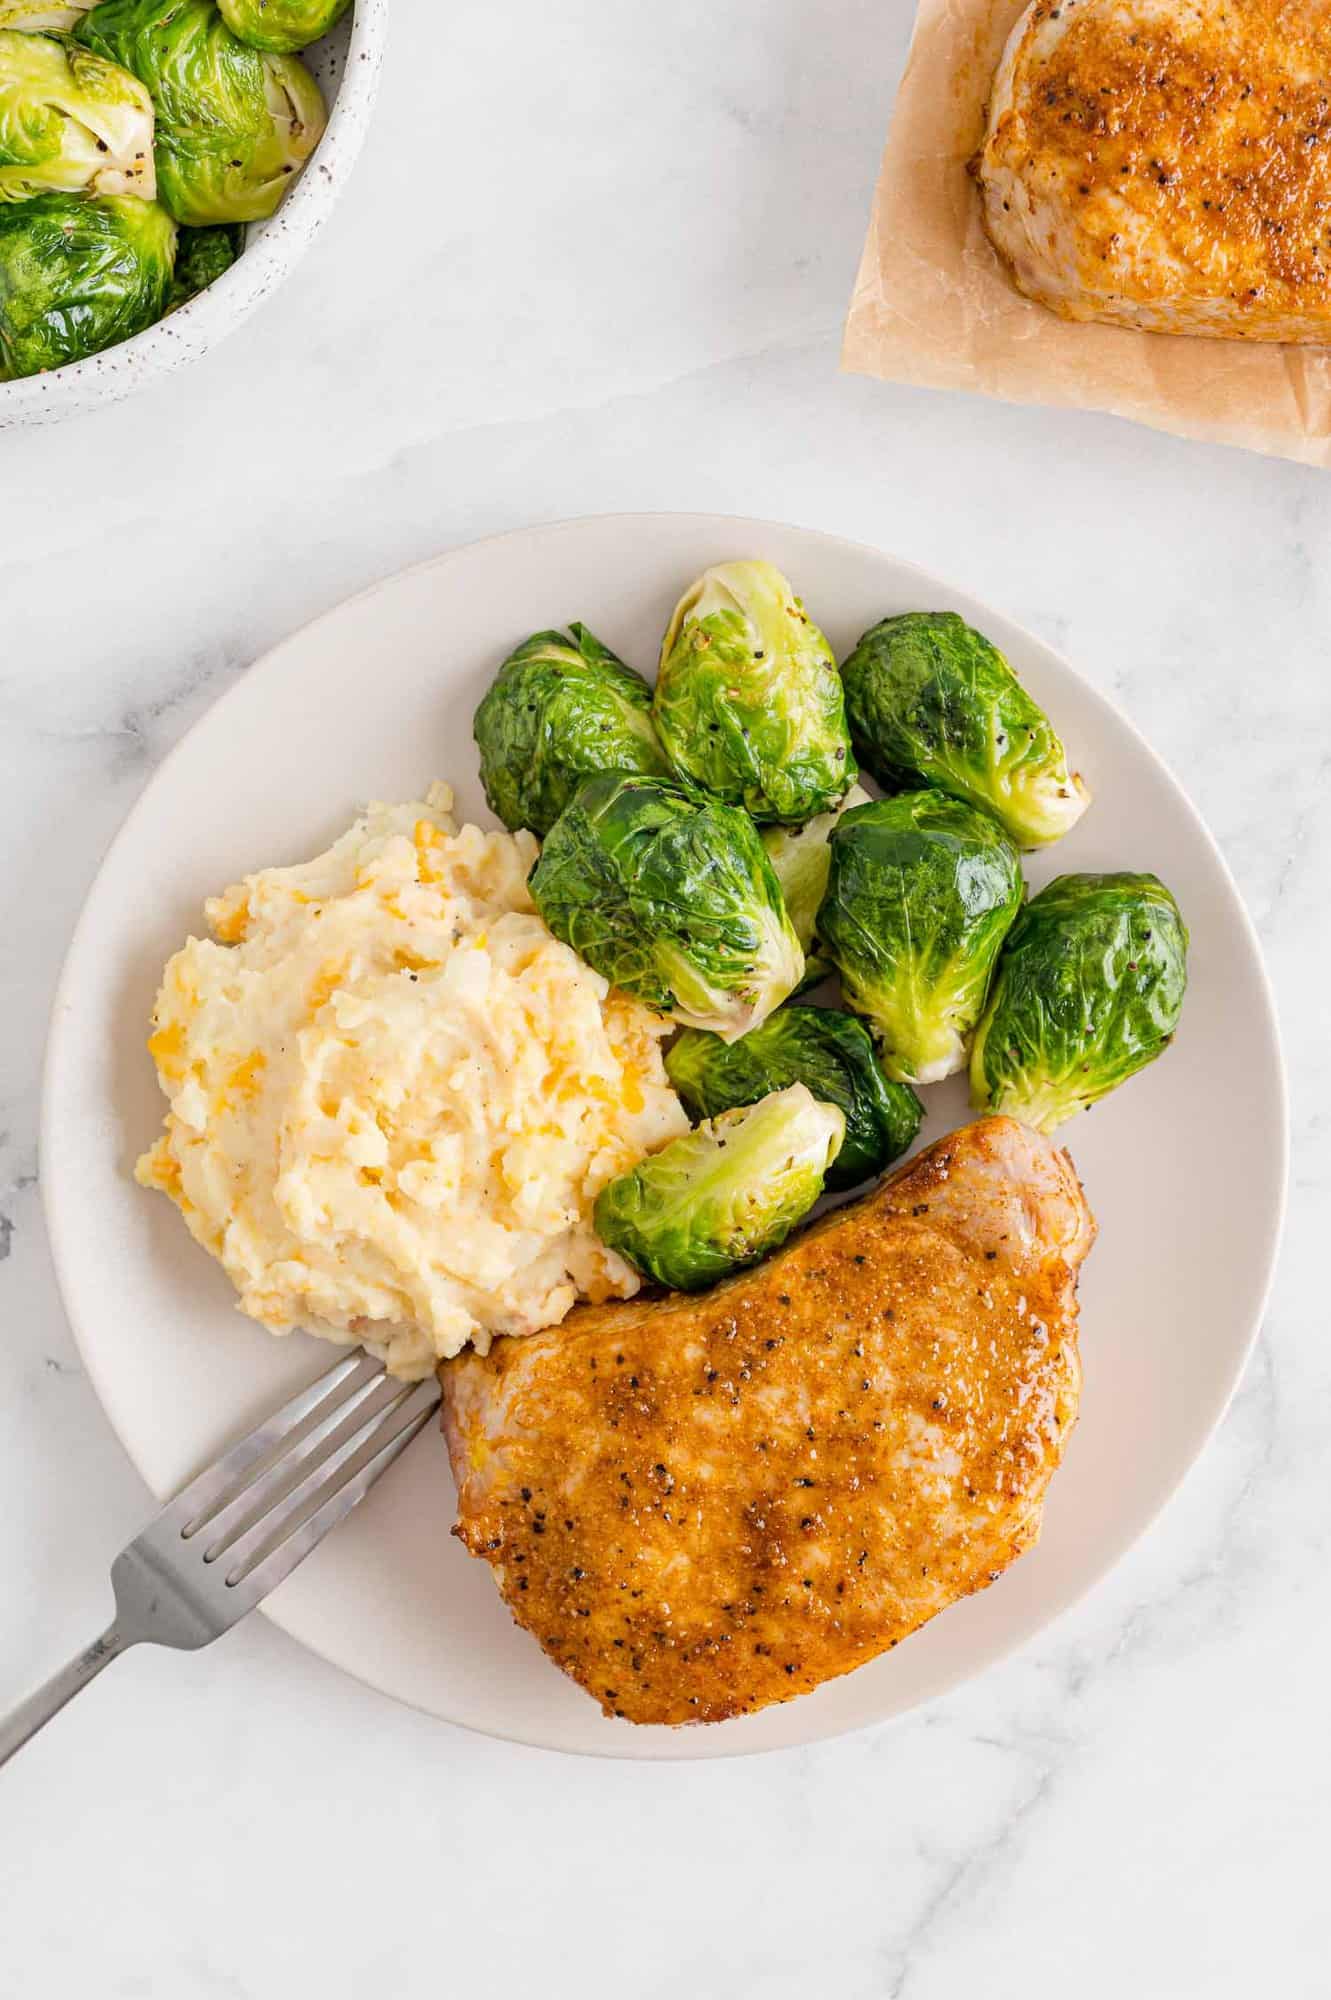 Pork on a plate with potatoes and brussels sprouts.